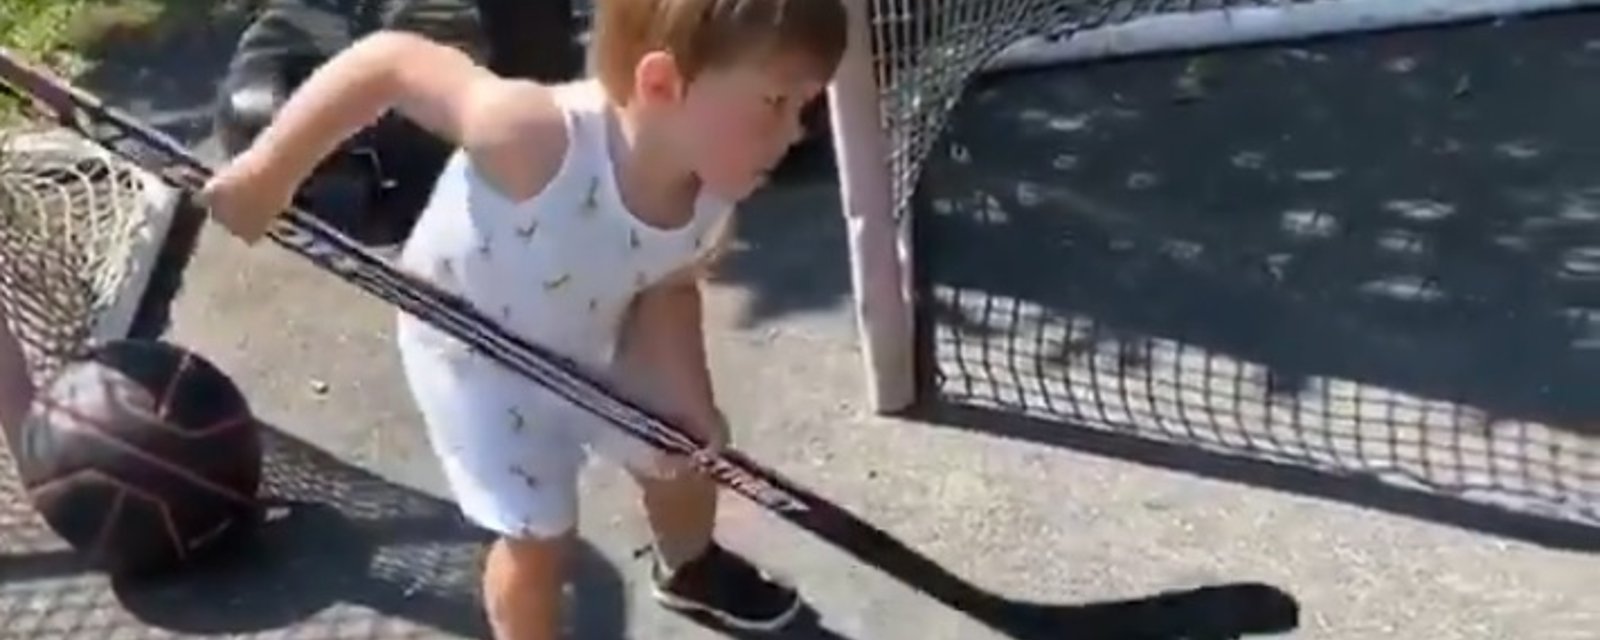 Sergei Ovechkin shows the apple doesn't fall far from the tree.